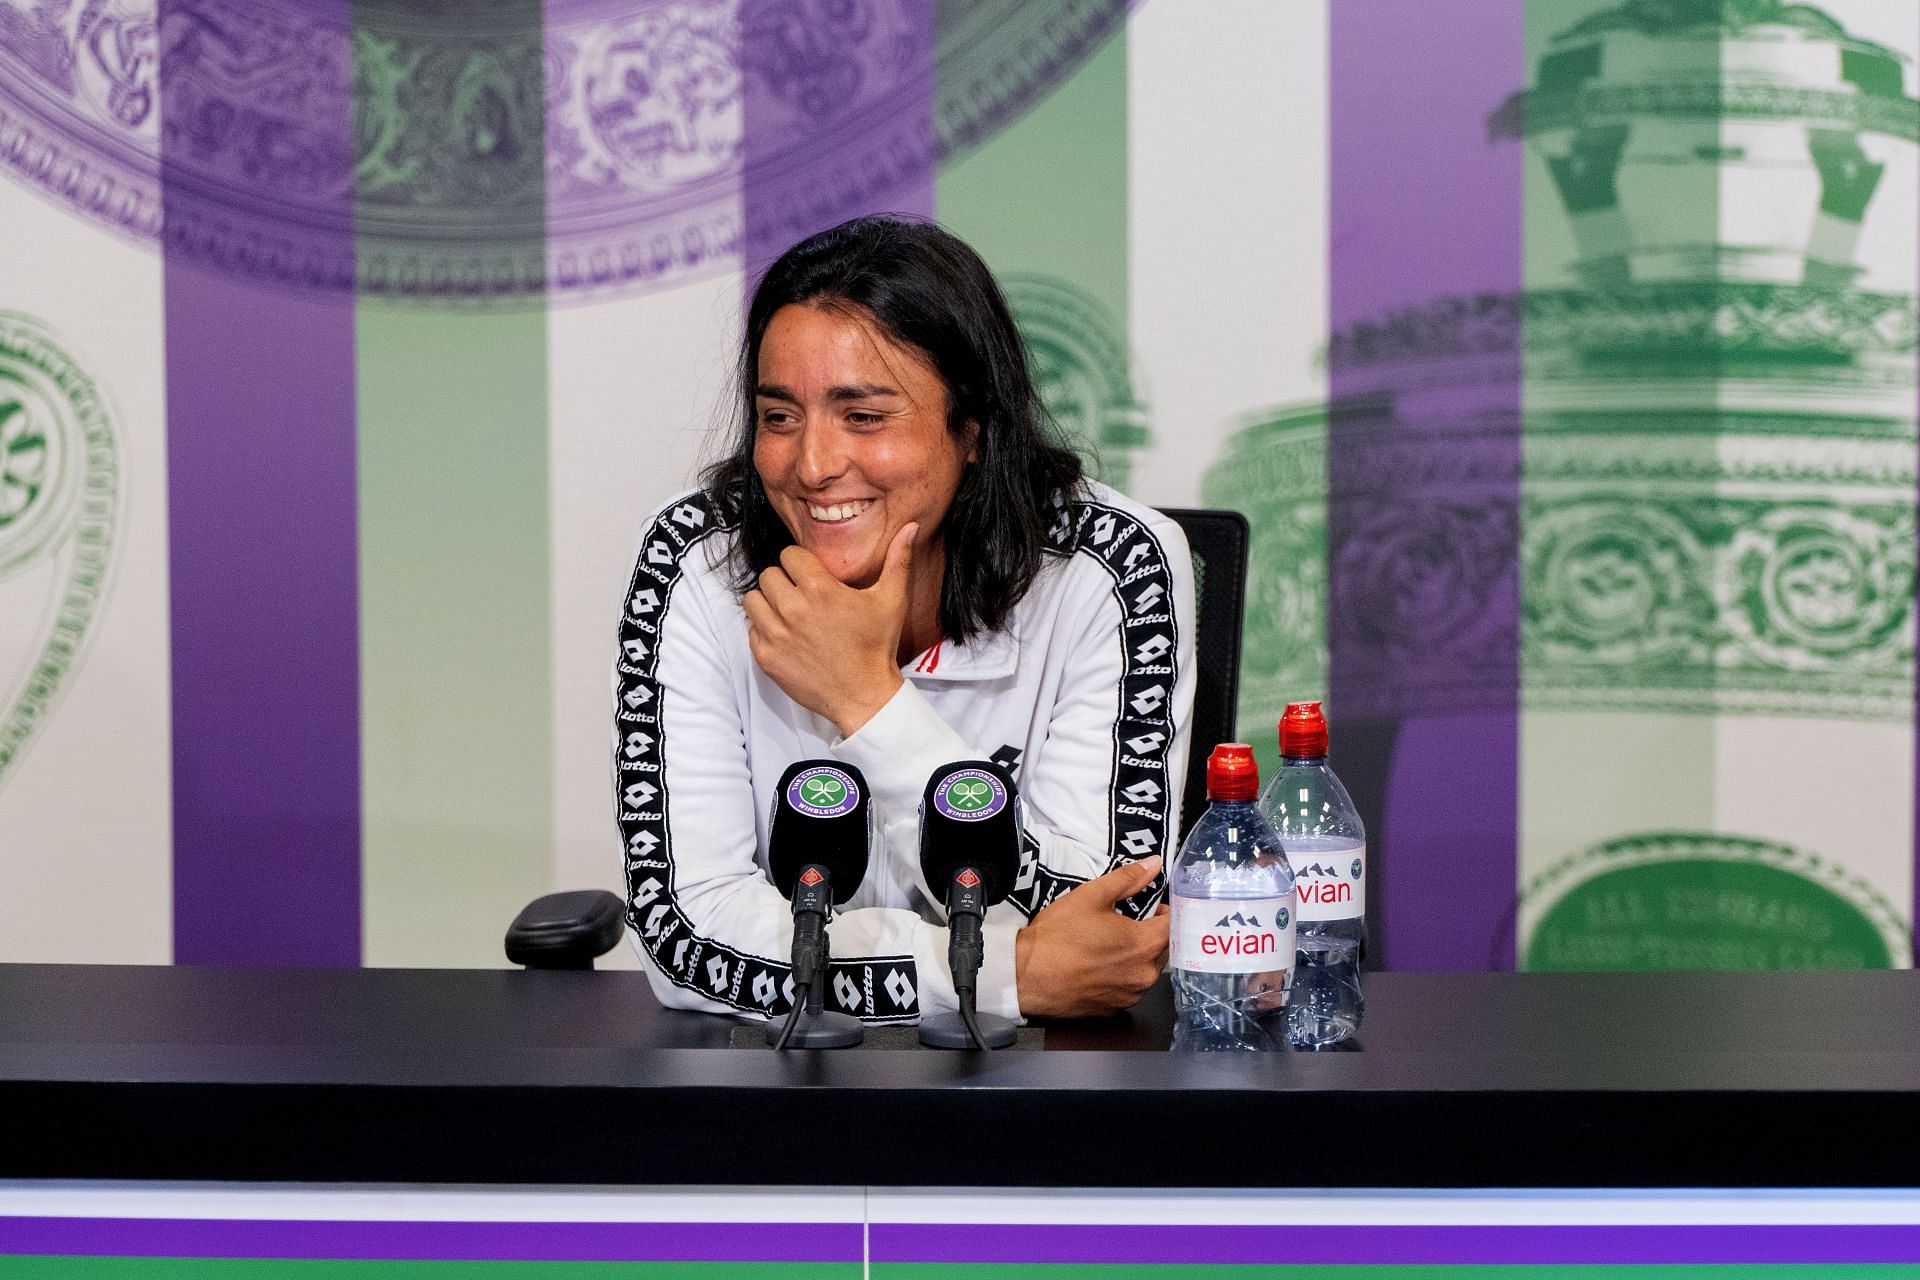 Ons Jabeur smiles during her press conference following her semifinal win at the 2022 Wimbledon Championships